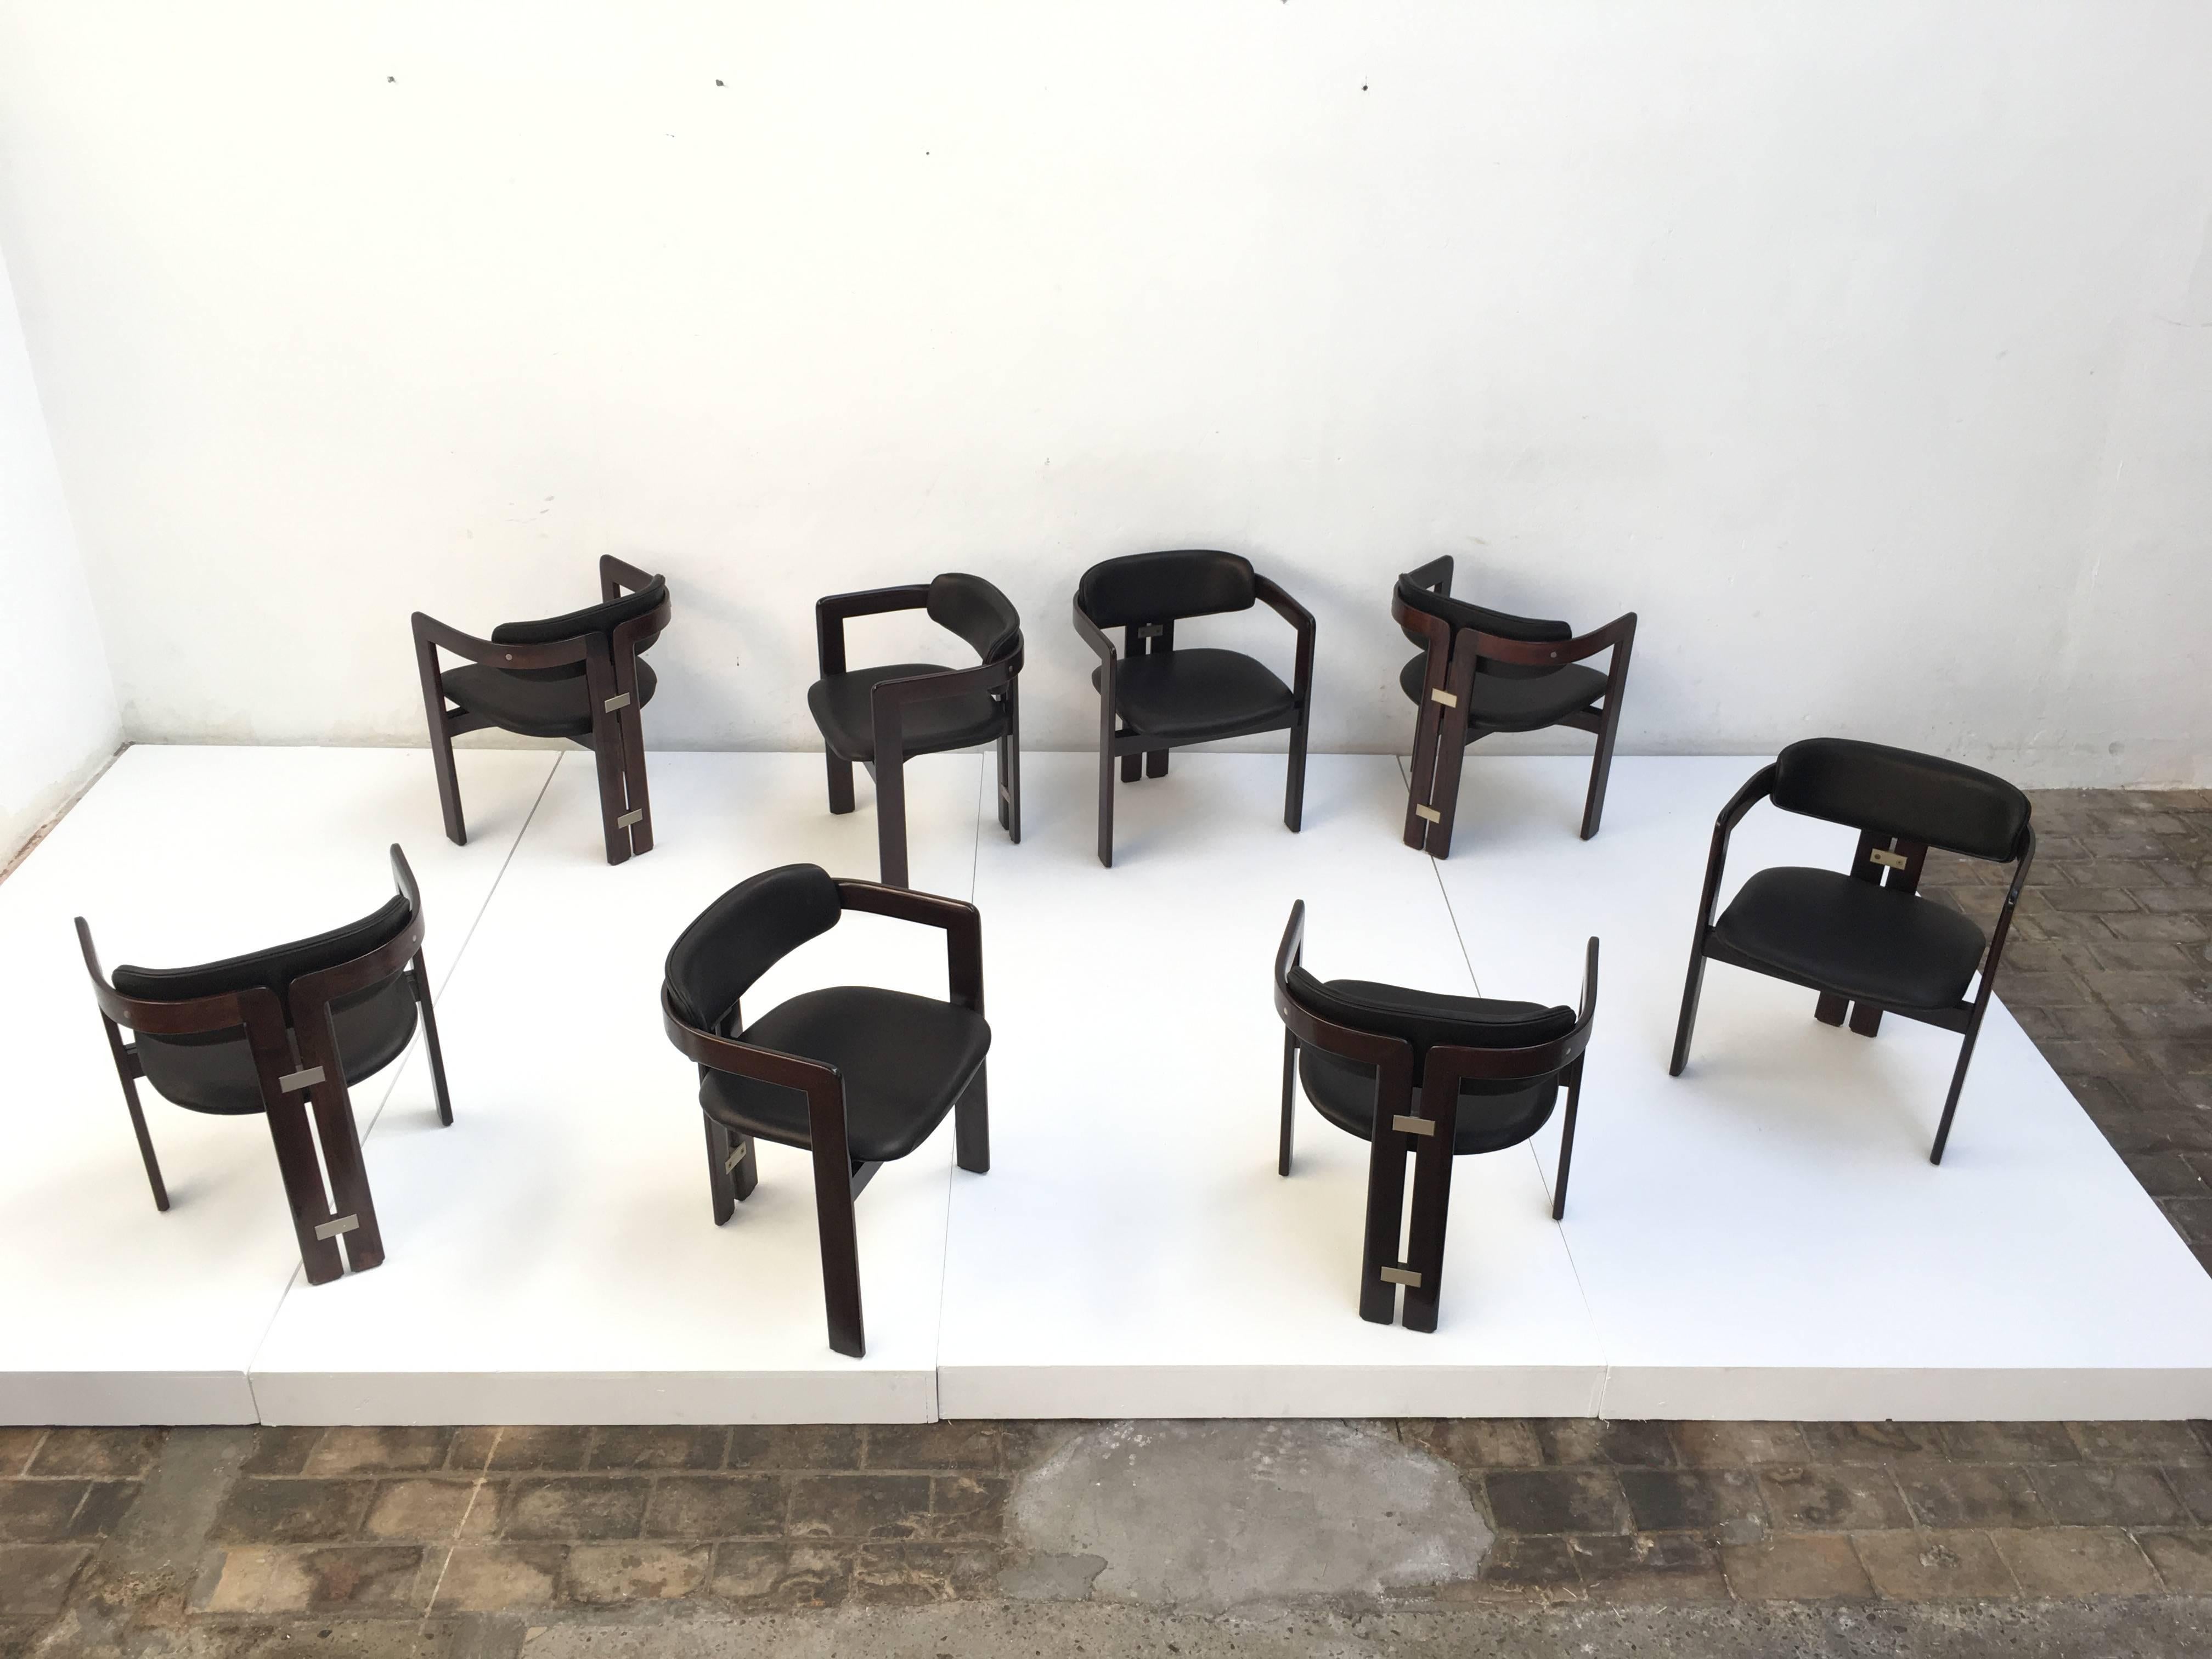 Superb and very rare set of eight 'Pamplona' dining chairs by Italian master designer Augusto Savini for Pozzi, Italy 1965. The Pamplona chair has a refined sculptural form reminiscent of the elegant forms and detailing created by Italian master